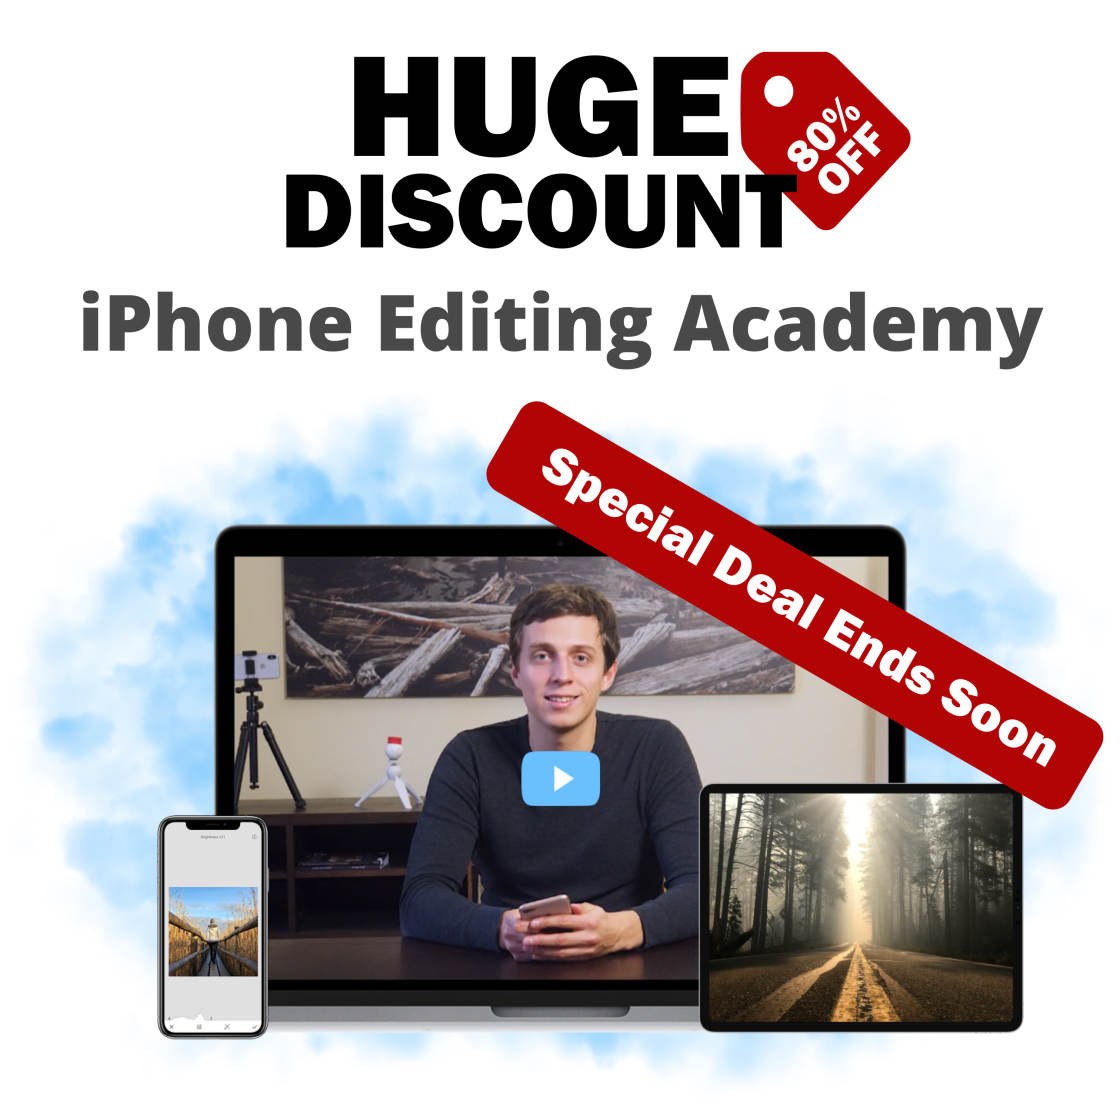 Huge 80% Discount For iPhone Editing Academy Course